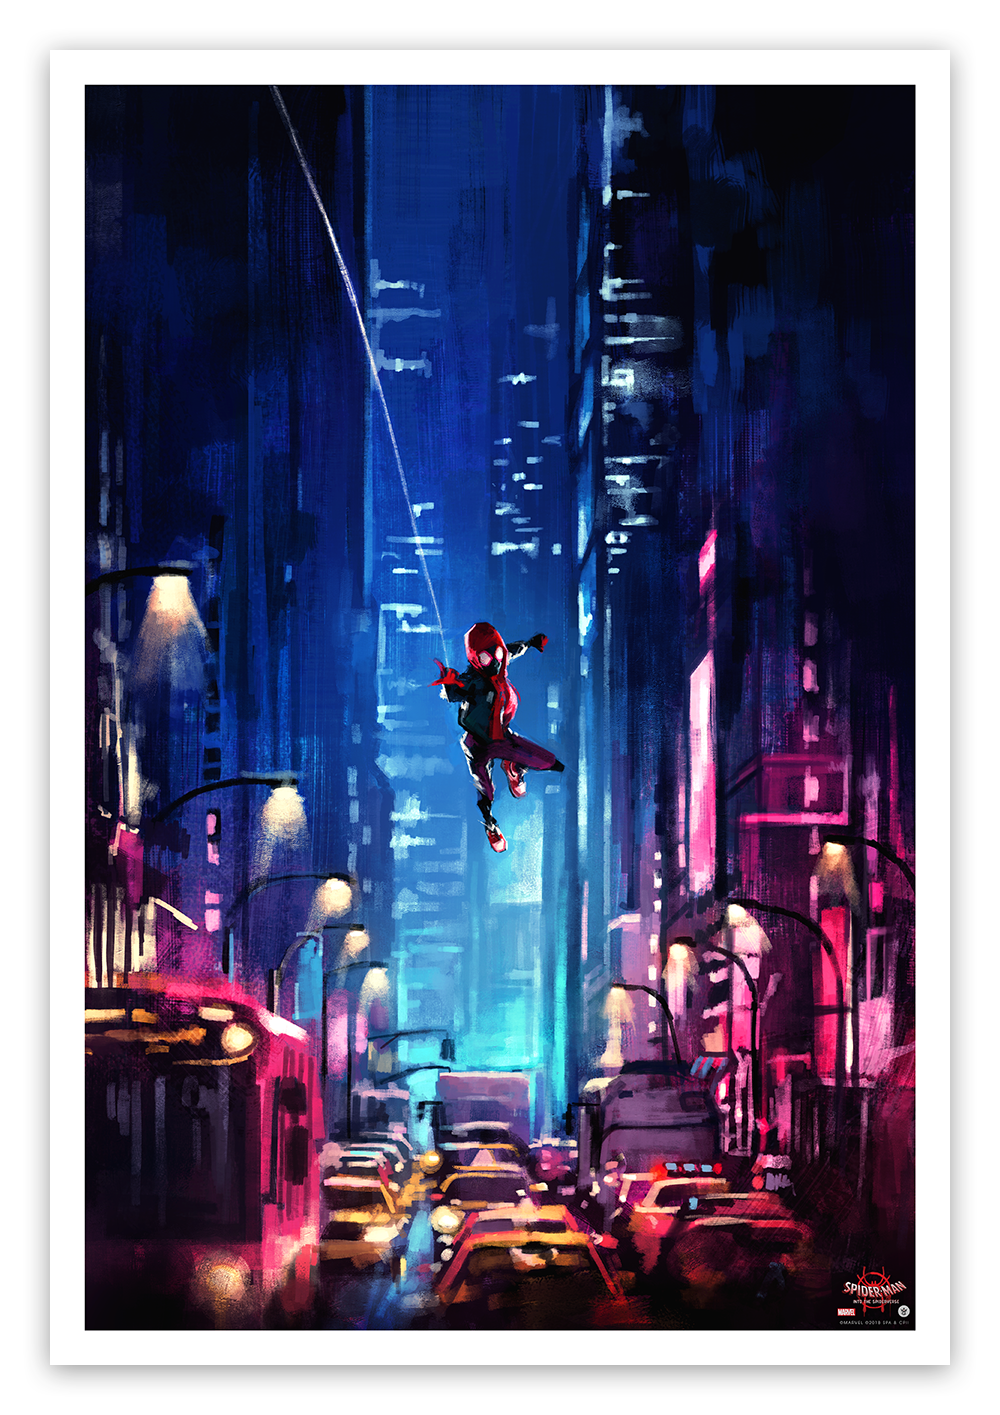 Alice X. Zhang "Spider Man: Into the Spider-Verse" SET